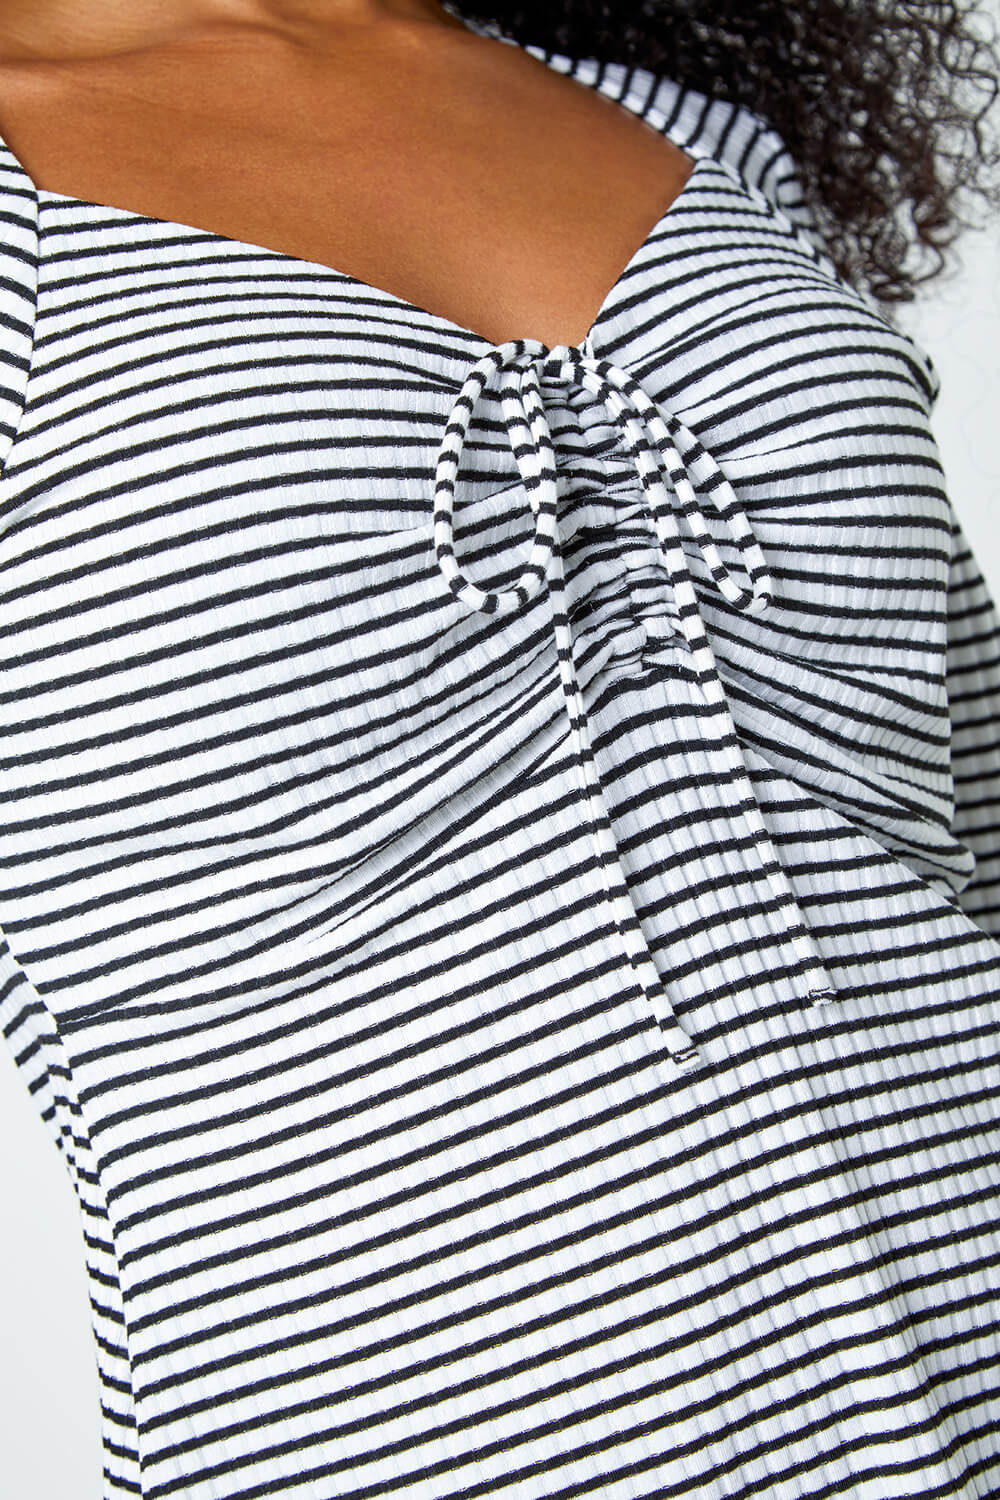 Black Petite Stripe Ruched Stretch Top, Image 5 of 5